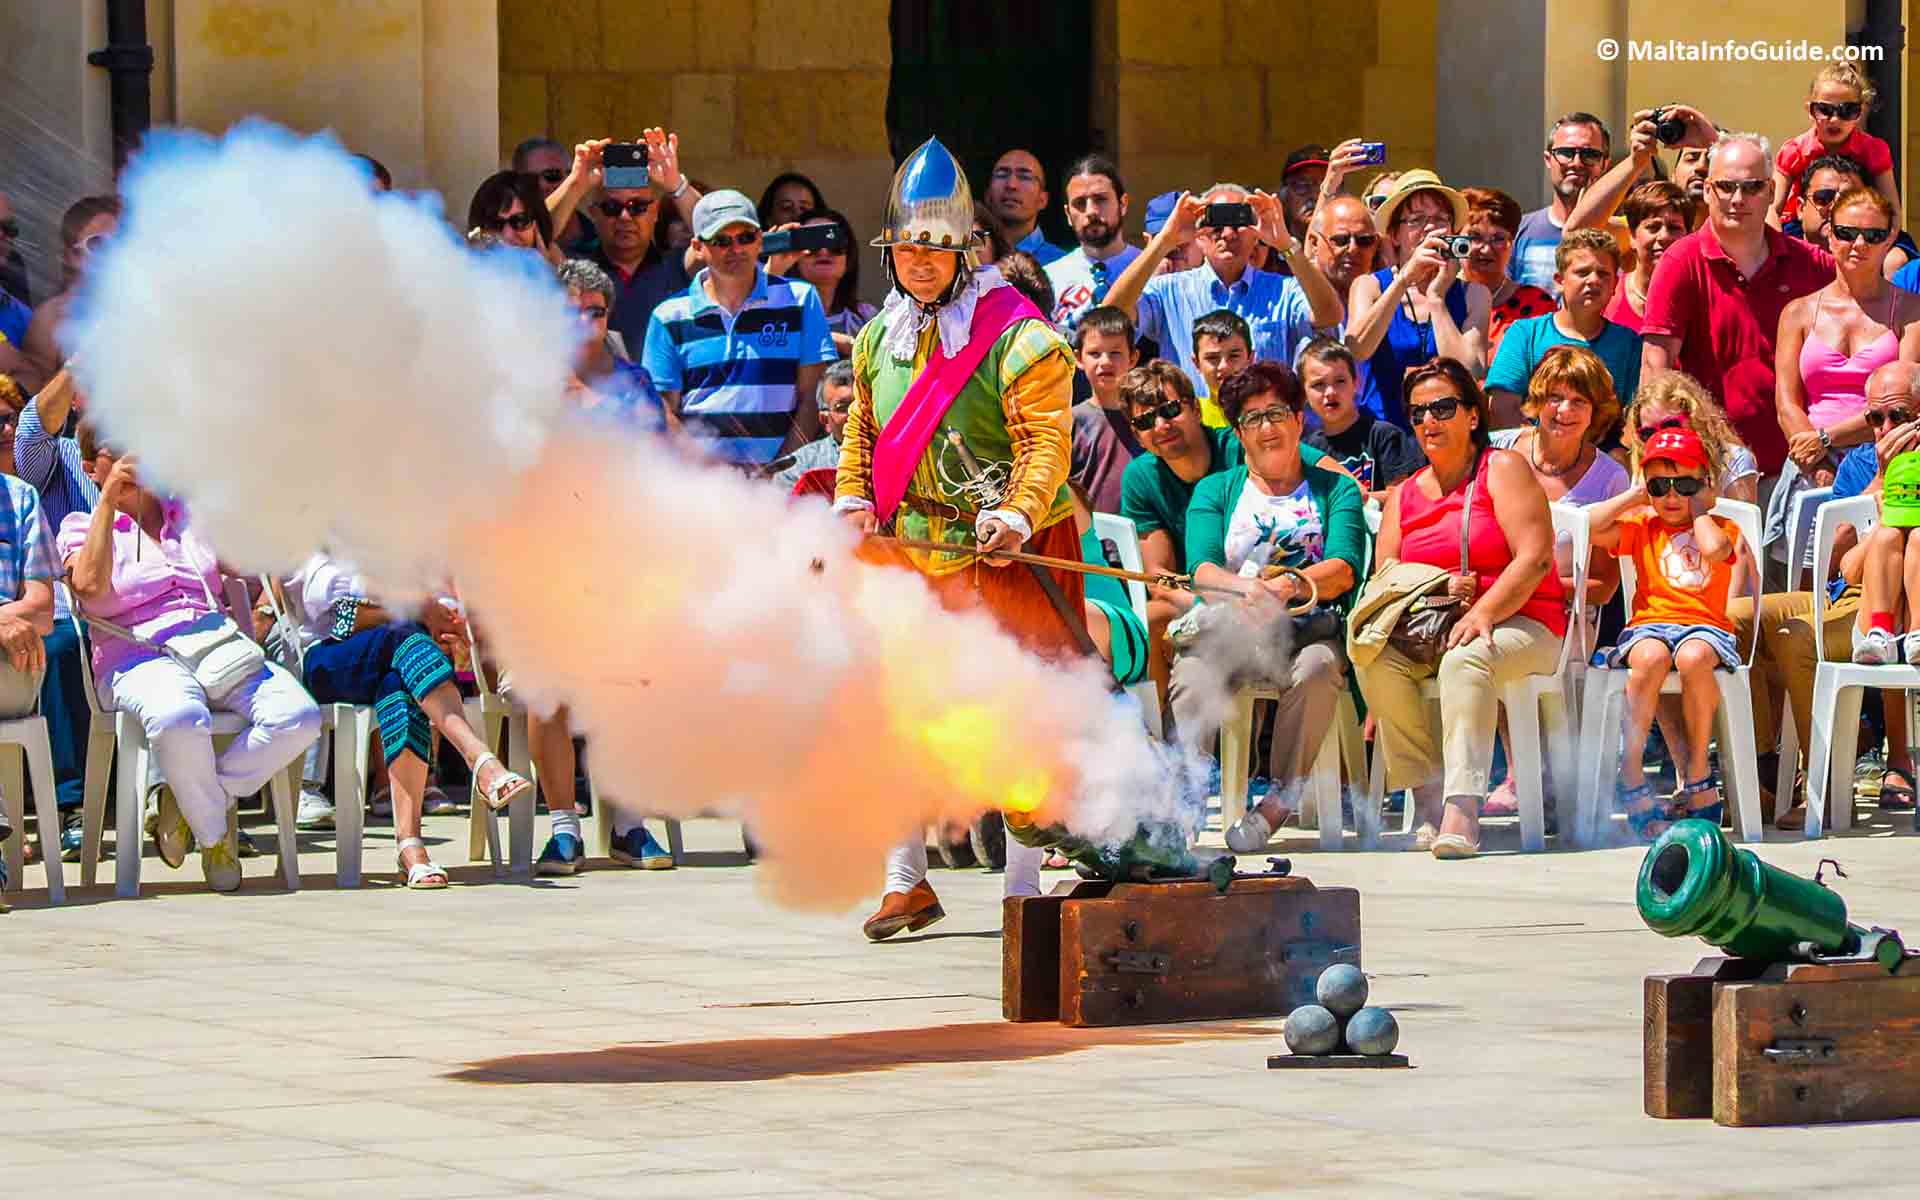 A small cannon being fired during the parade.